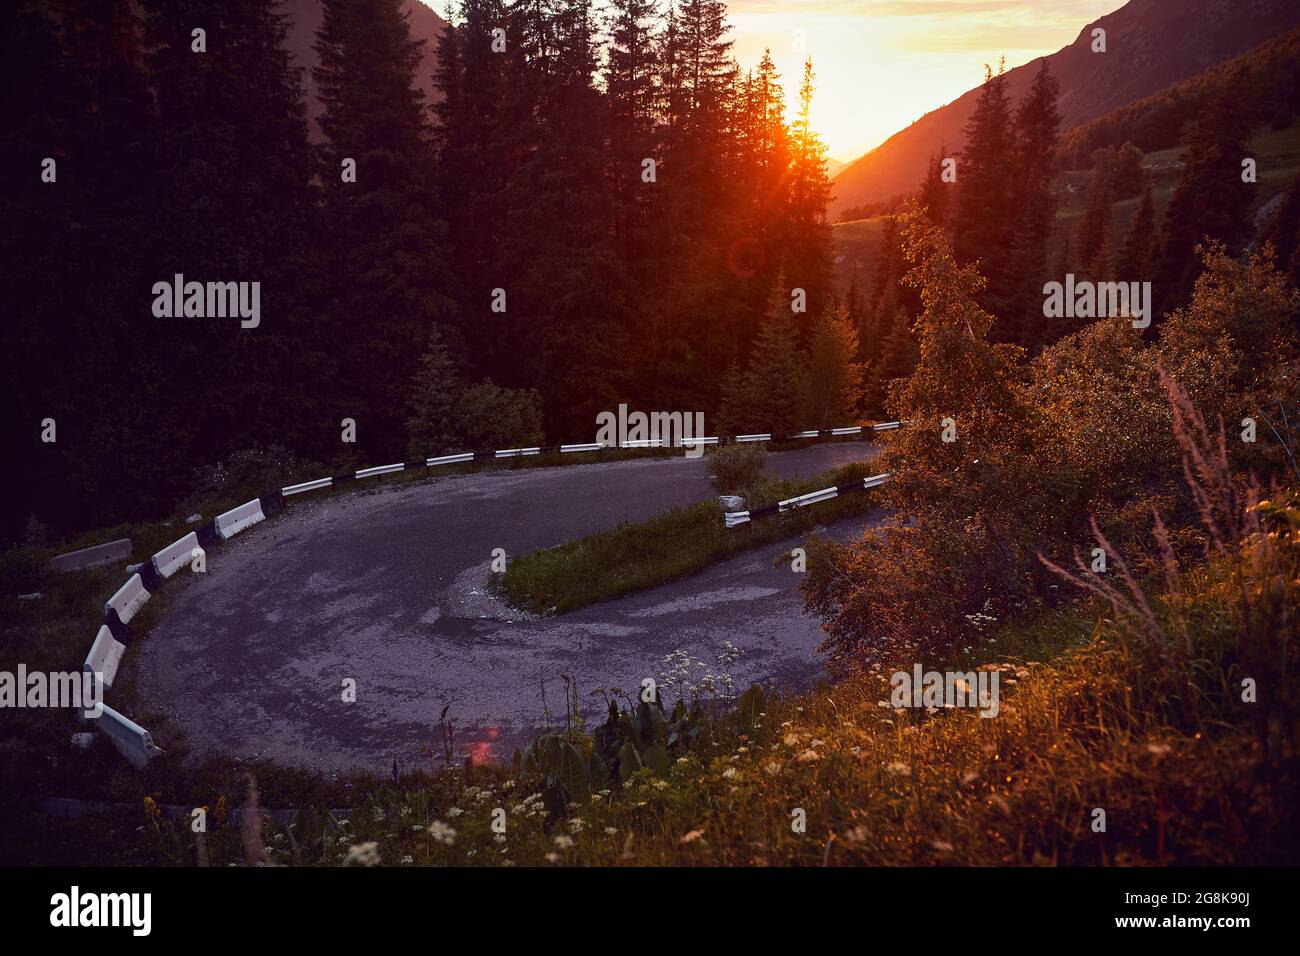 Asphalt road serpentine turn in the mountains in Kazakhstan at sunset sky. Famous mountain road to Big Almaty Lake. Stock Photo